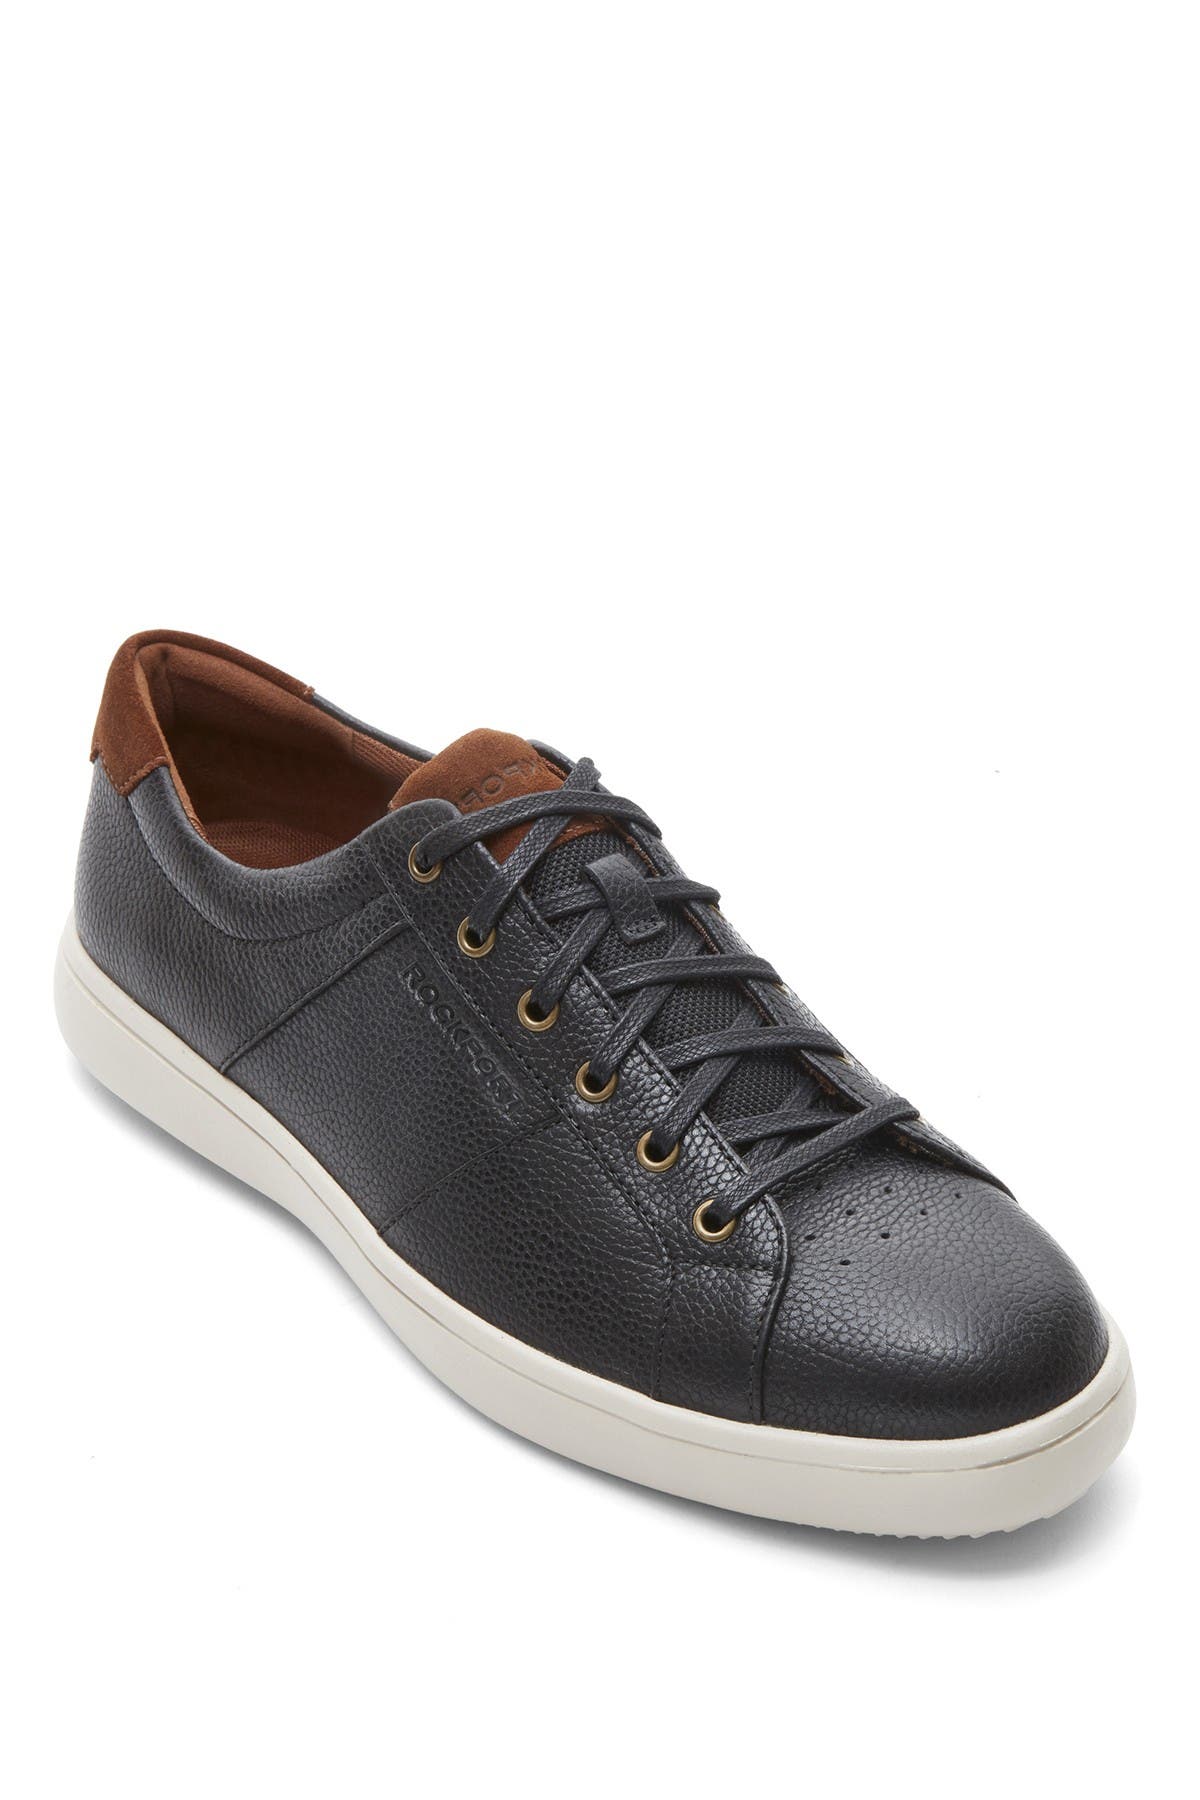 Rockport JARVIS LACE TO TOE SNEAKER